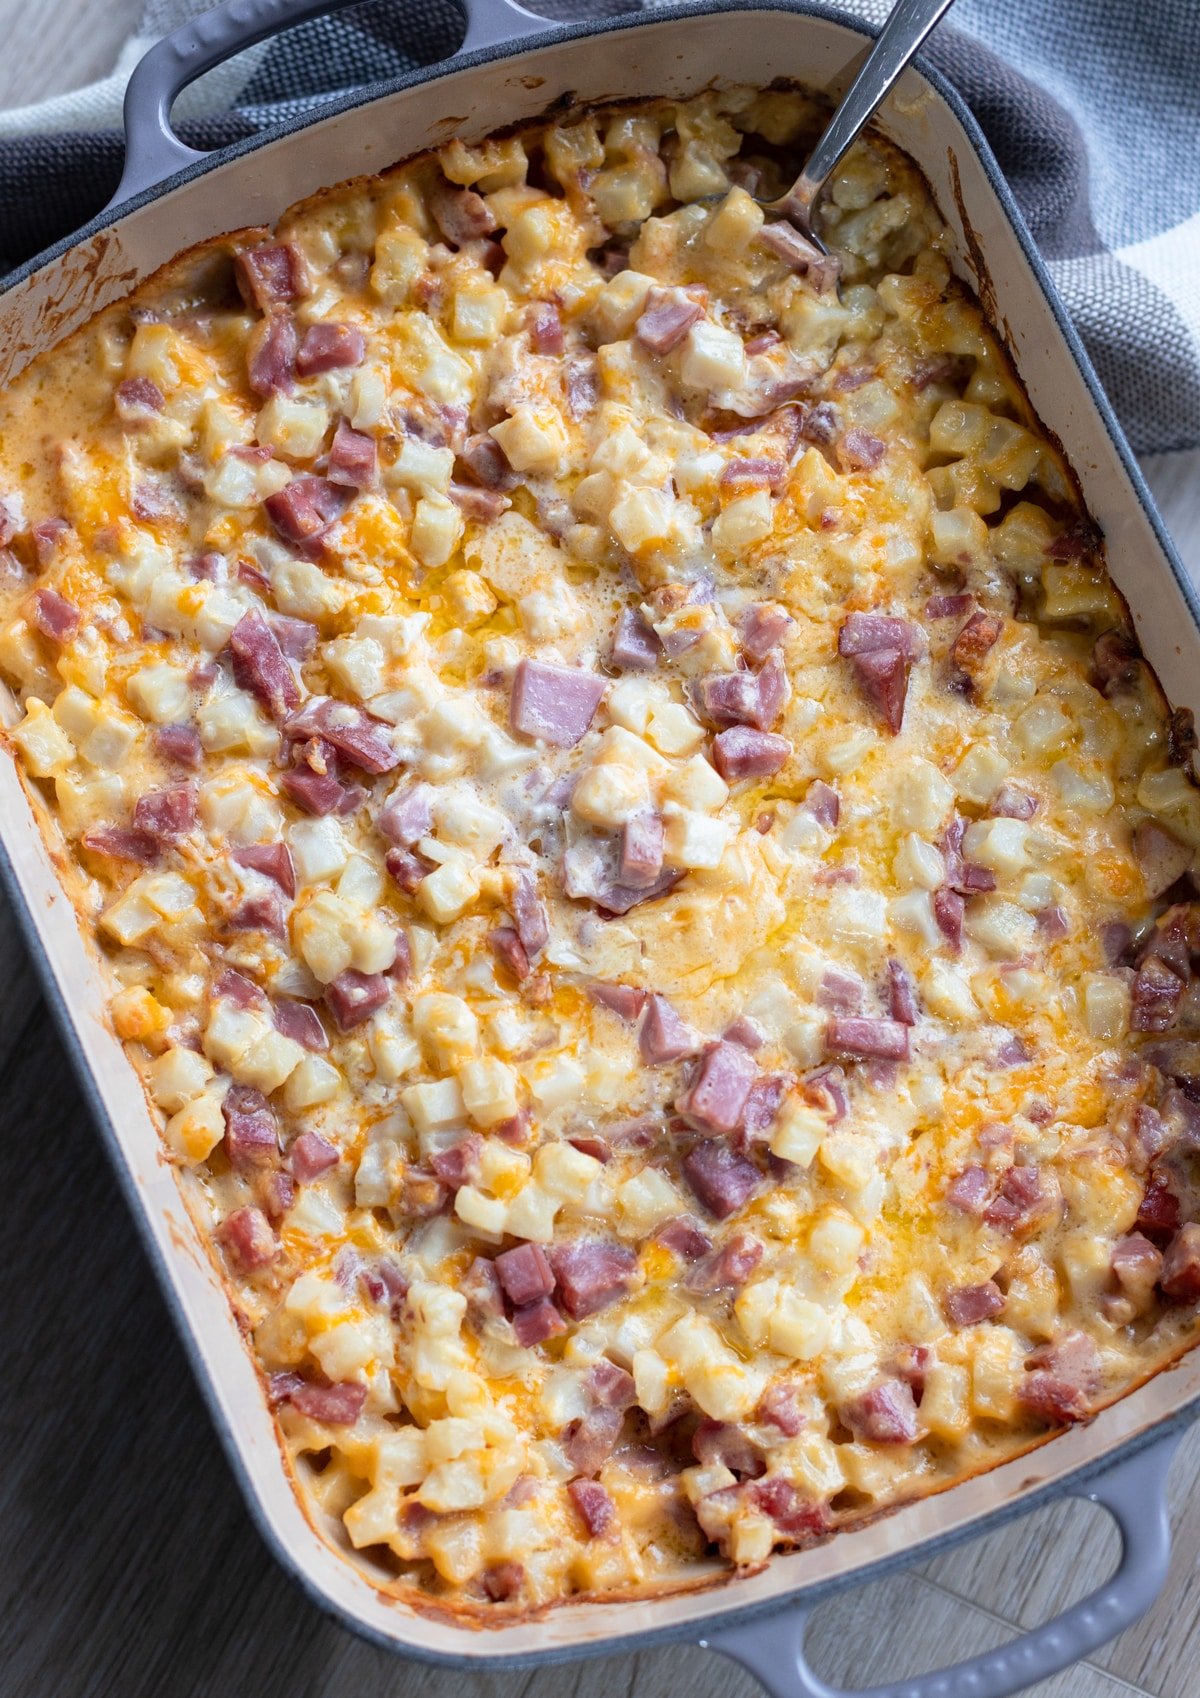 Casserole dish containing baked ham and potato casserole, spoon in dish. 